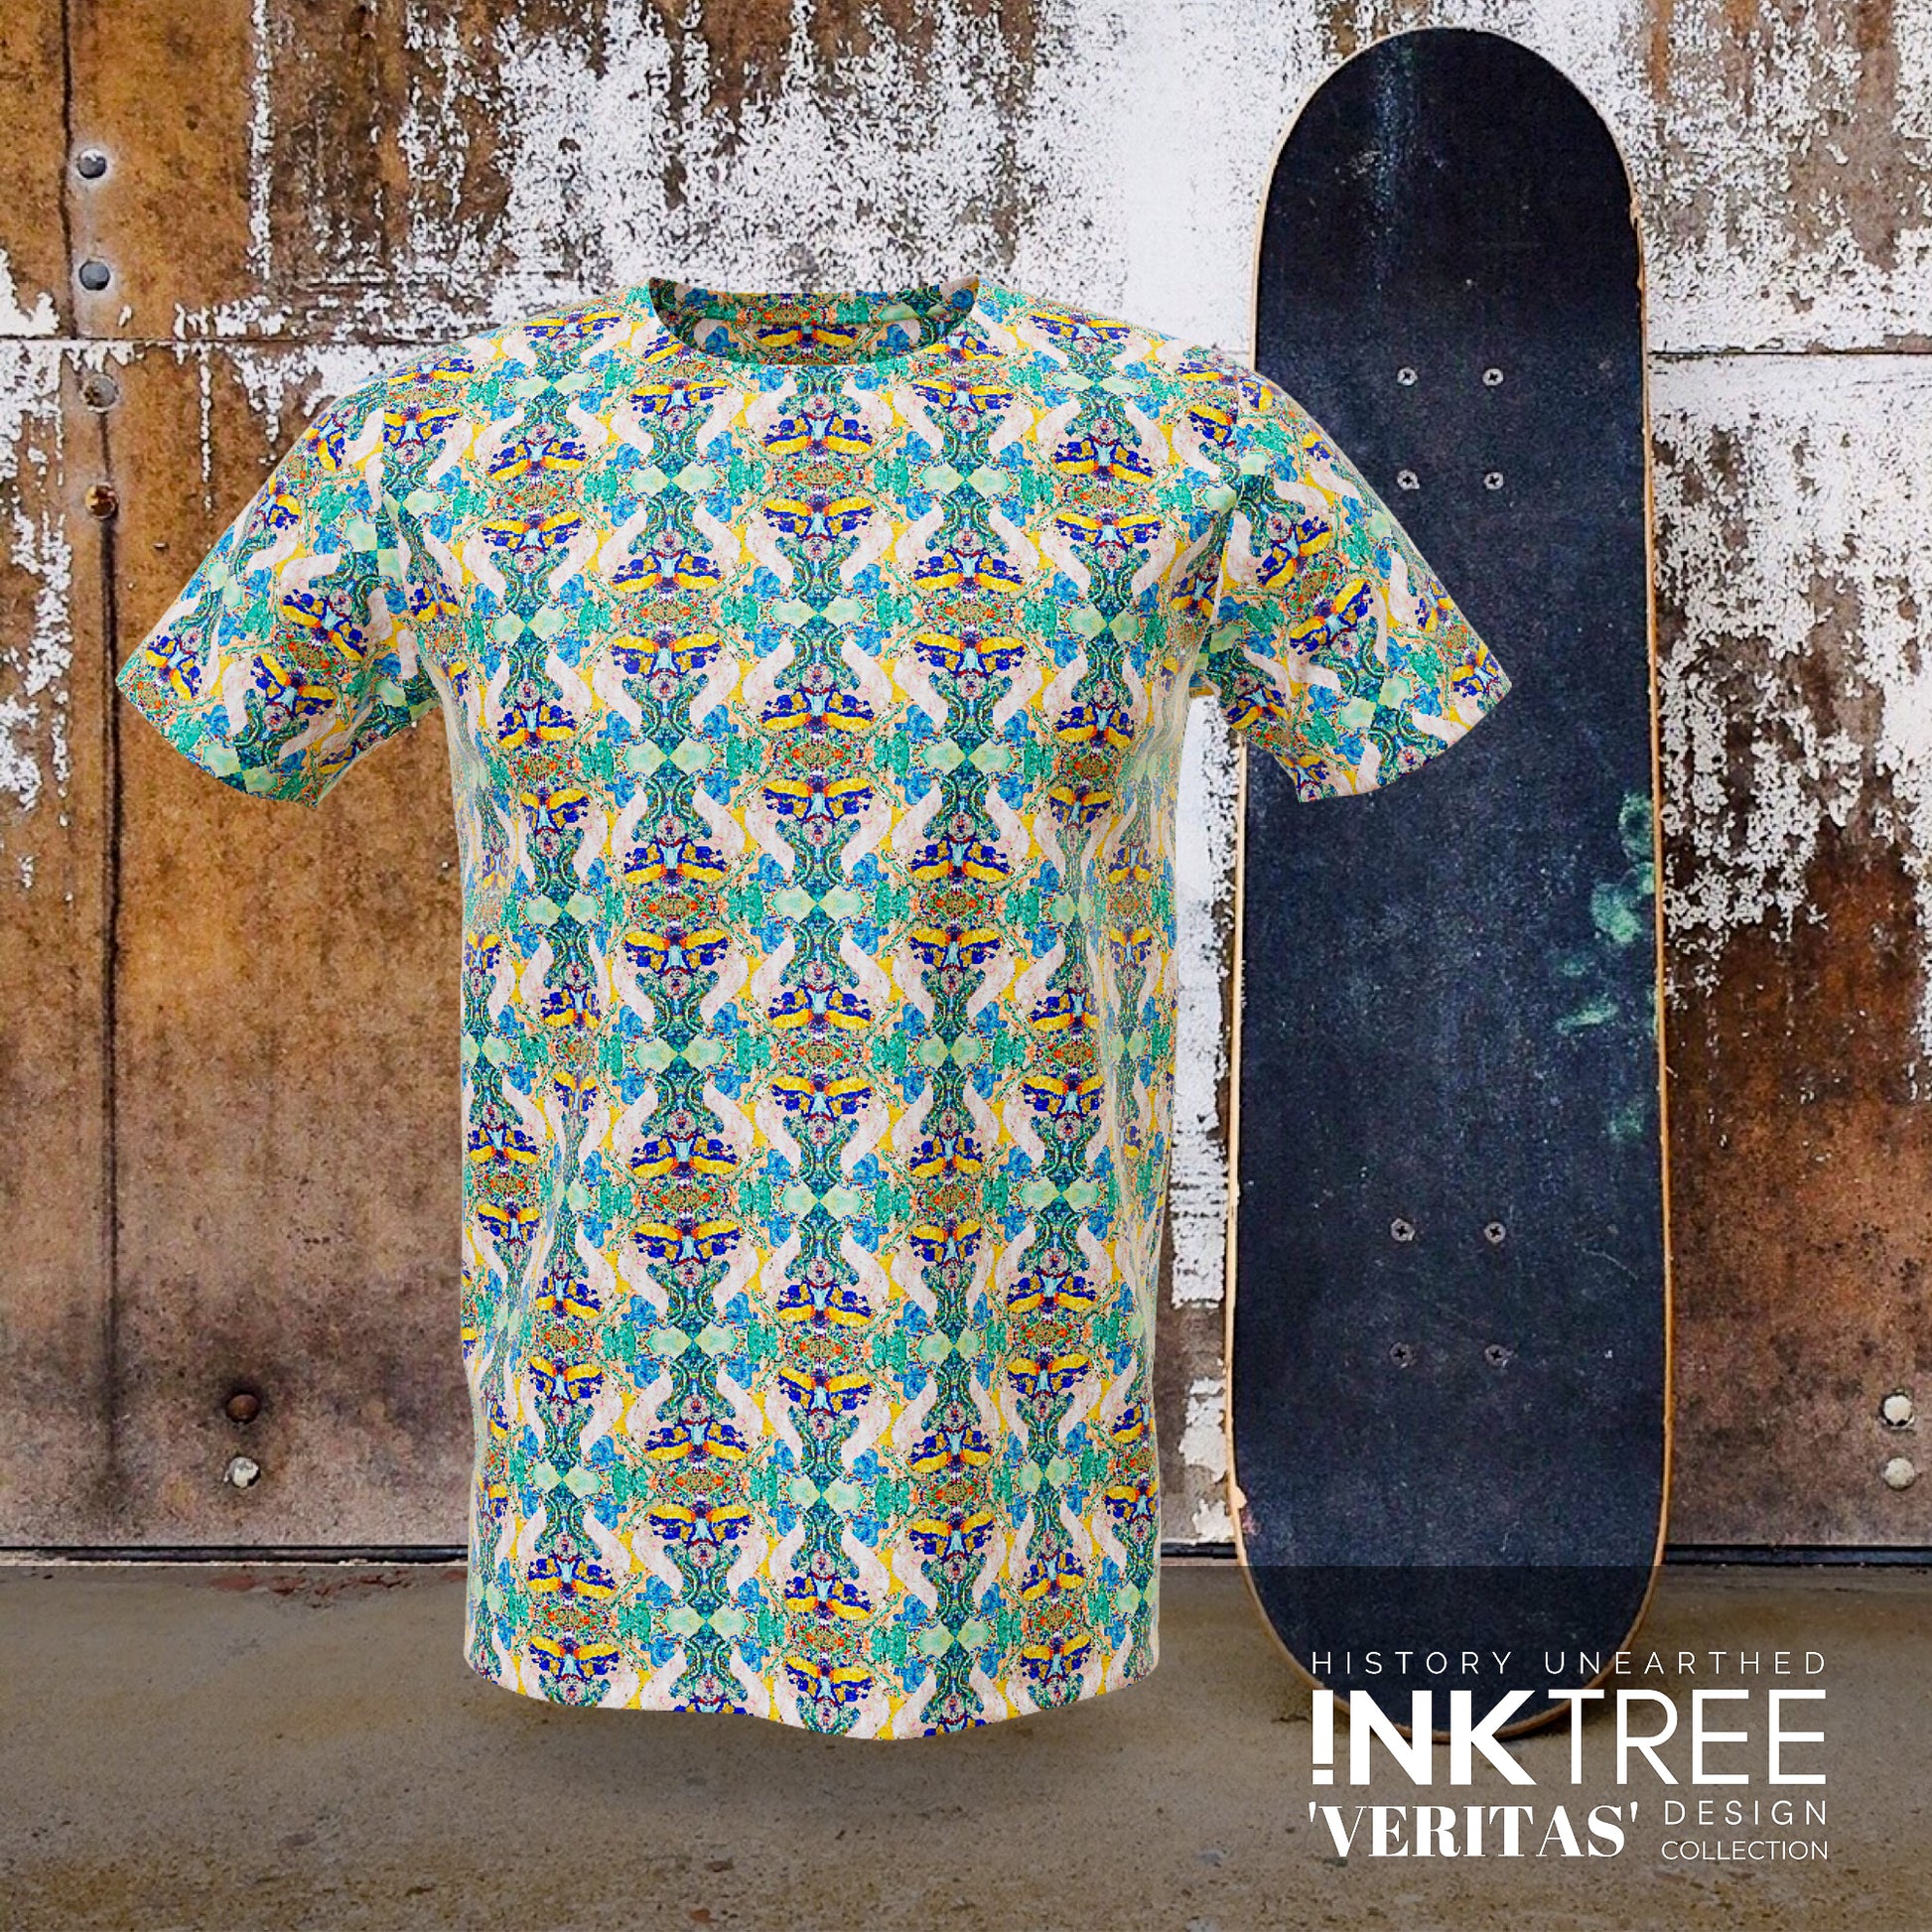 A tshirt with a green, blue and gold pattern.with a skateboard and rusty wall background.